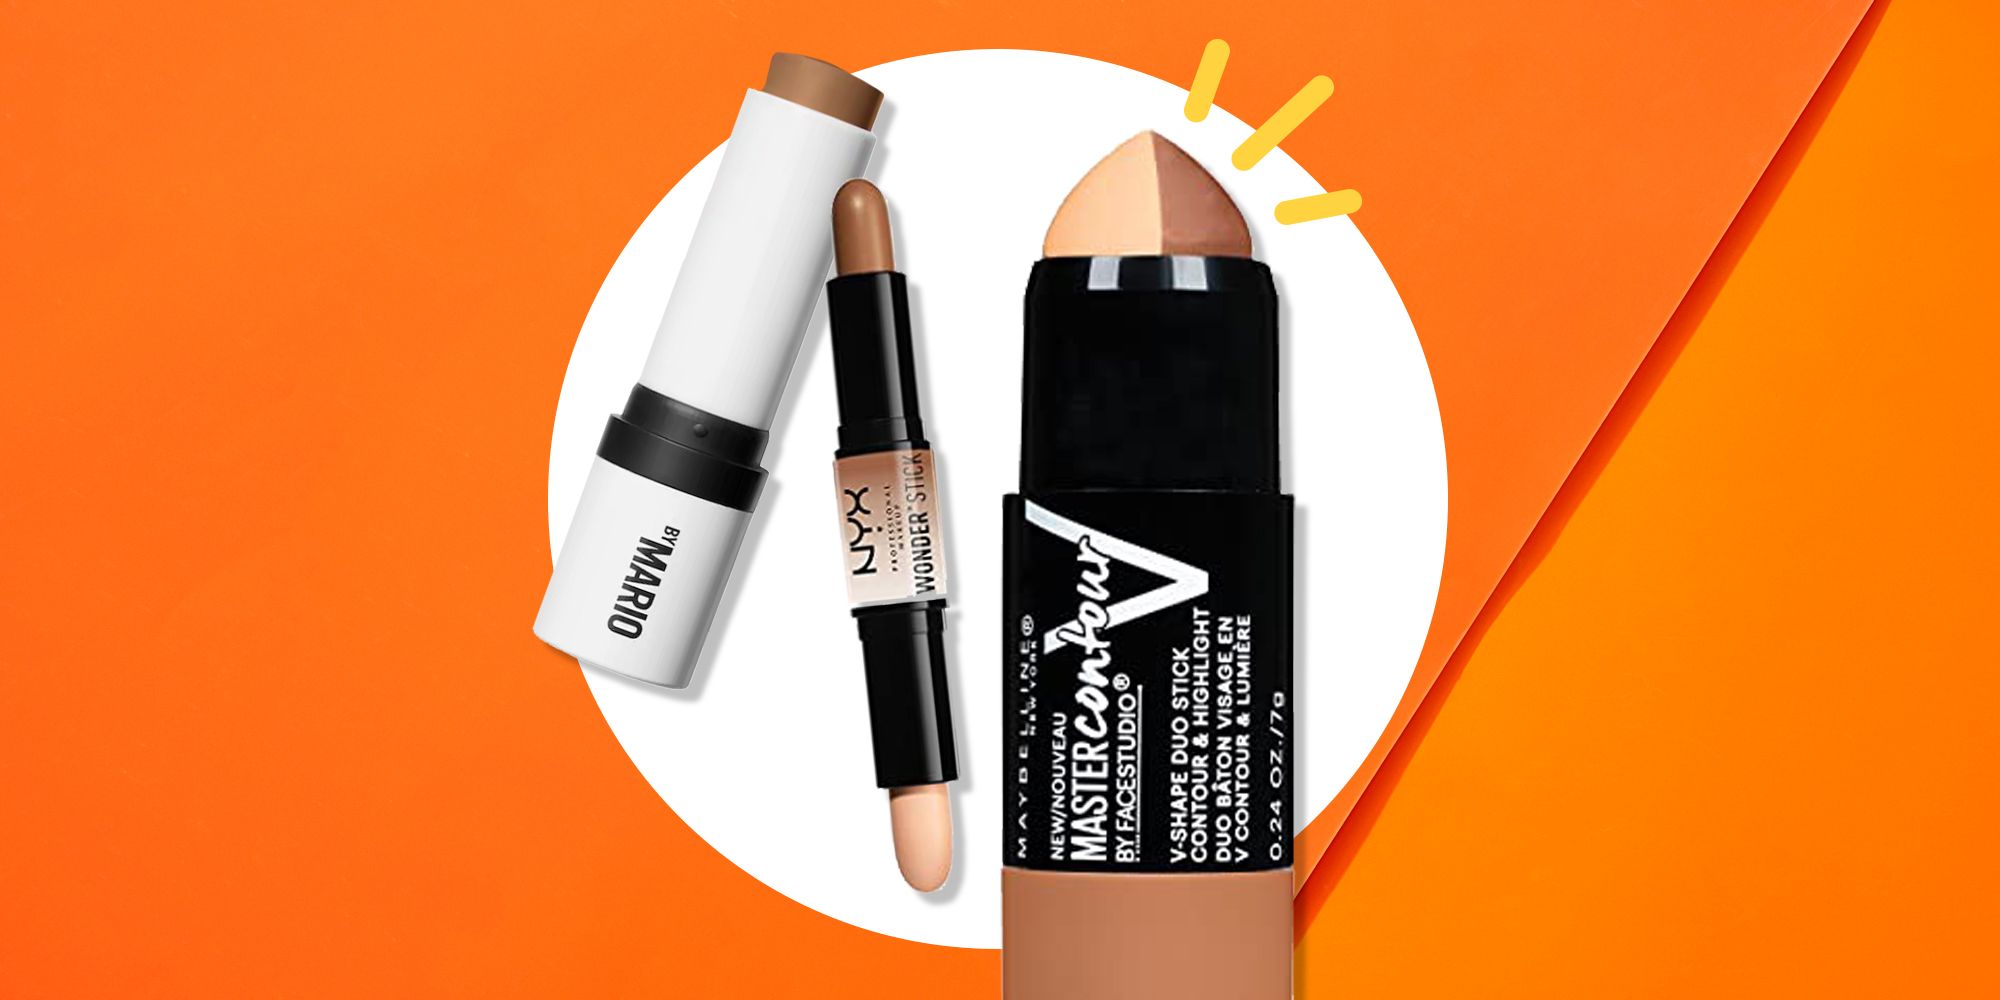 10 Best Contour for Sculpting, According to